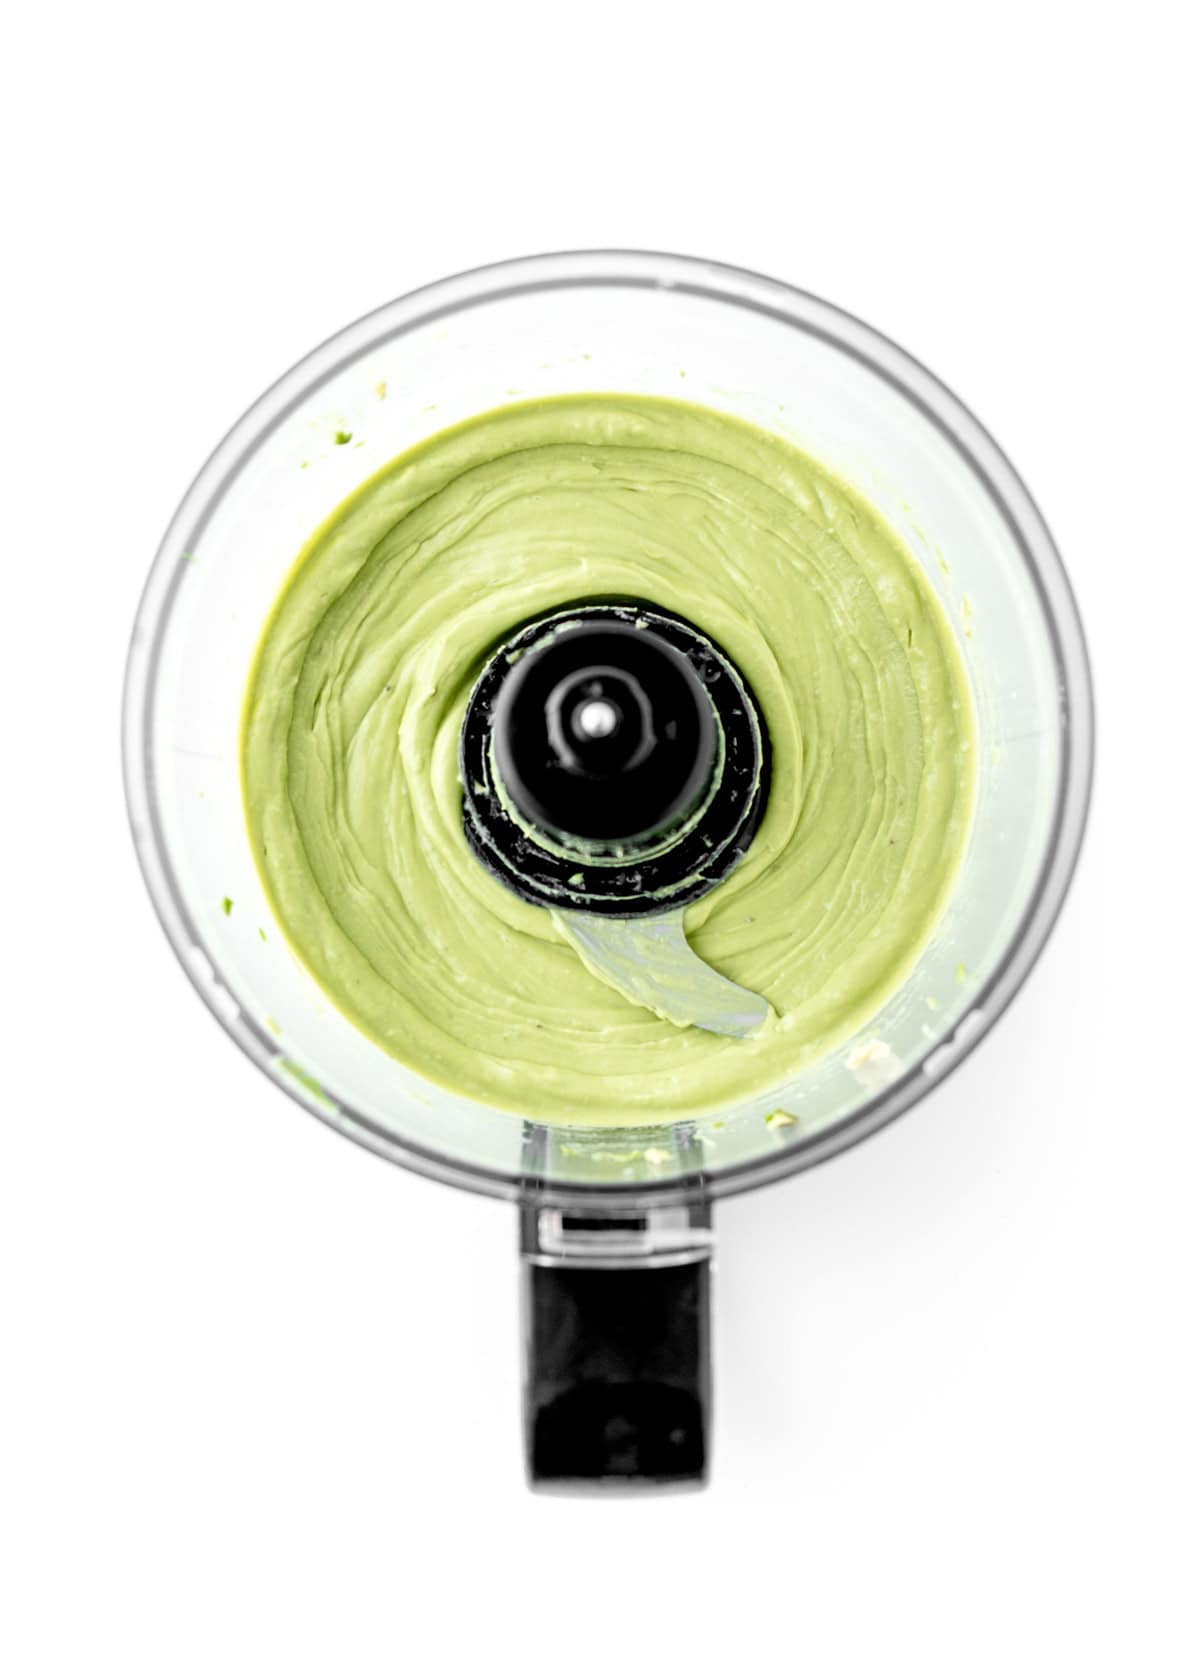 Blending the avocados in a food processor until smooth and creamy.